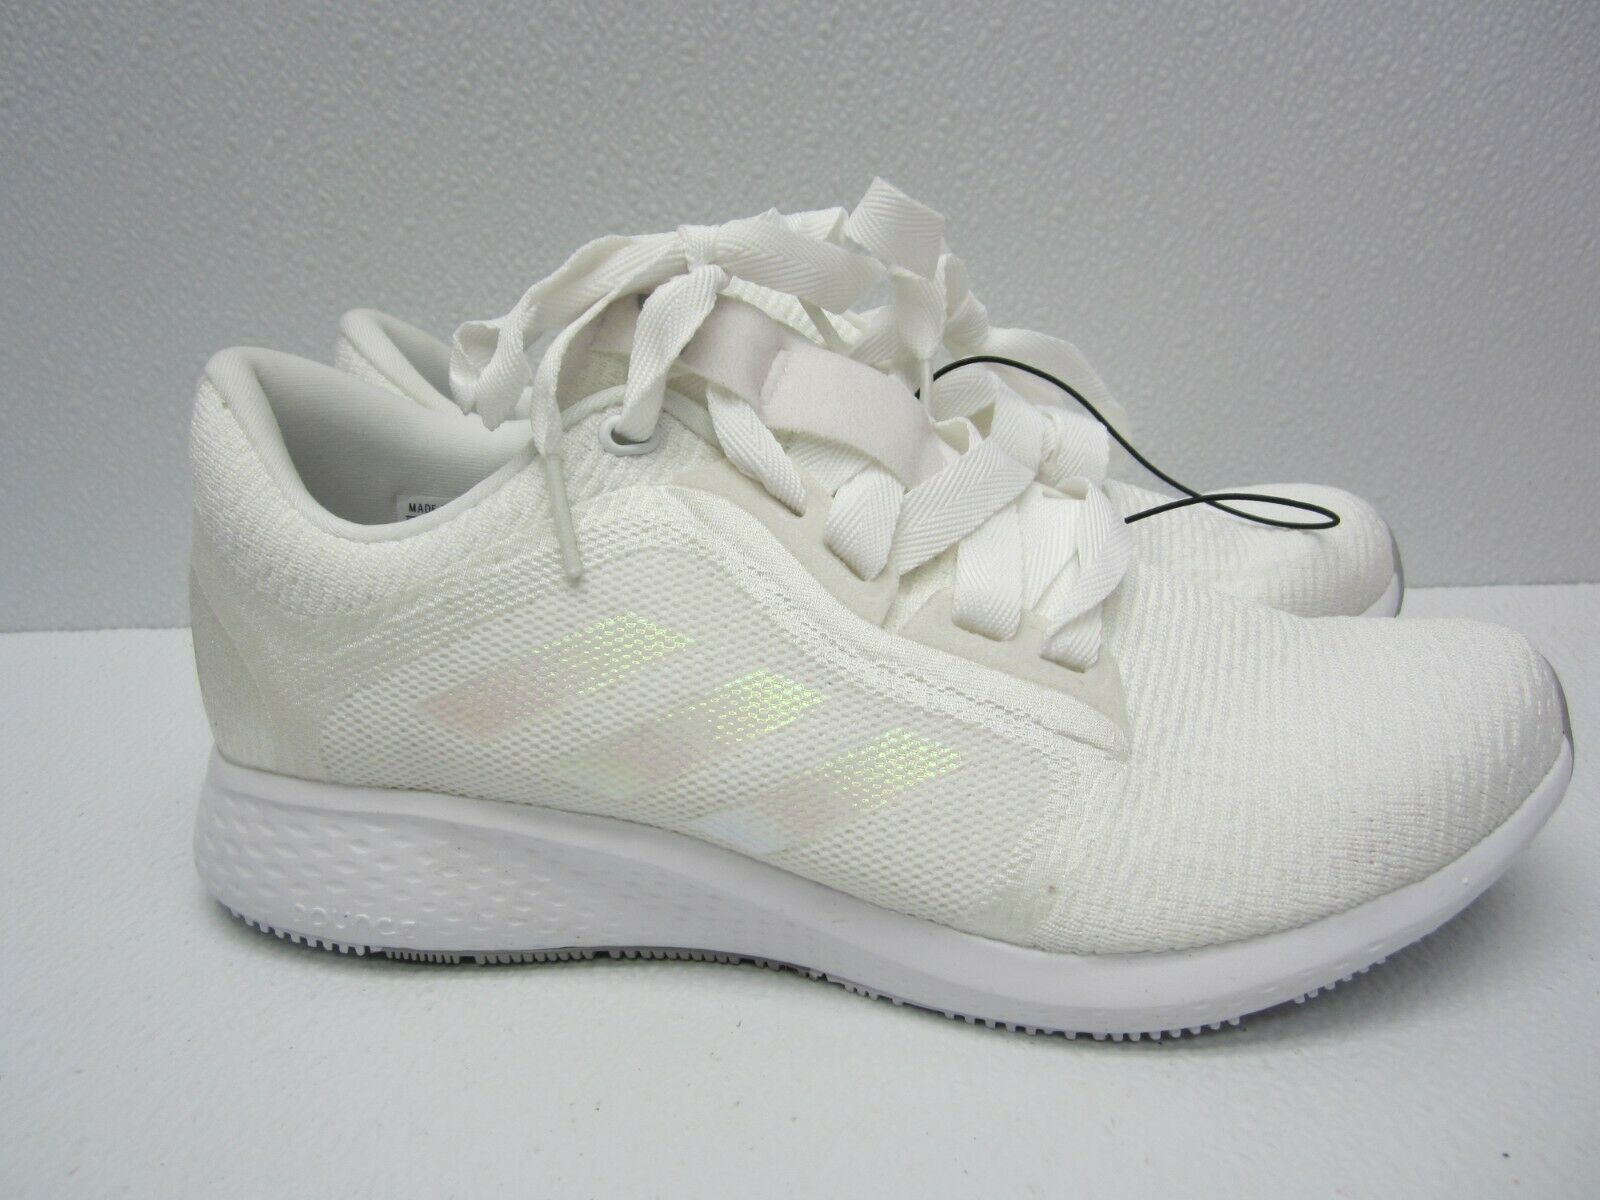 Adidas Edge Lux 4 White Women Sz 9 Running Casual Shoes Sneakers Trainers FW9259